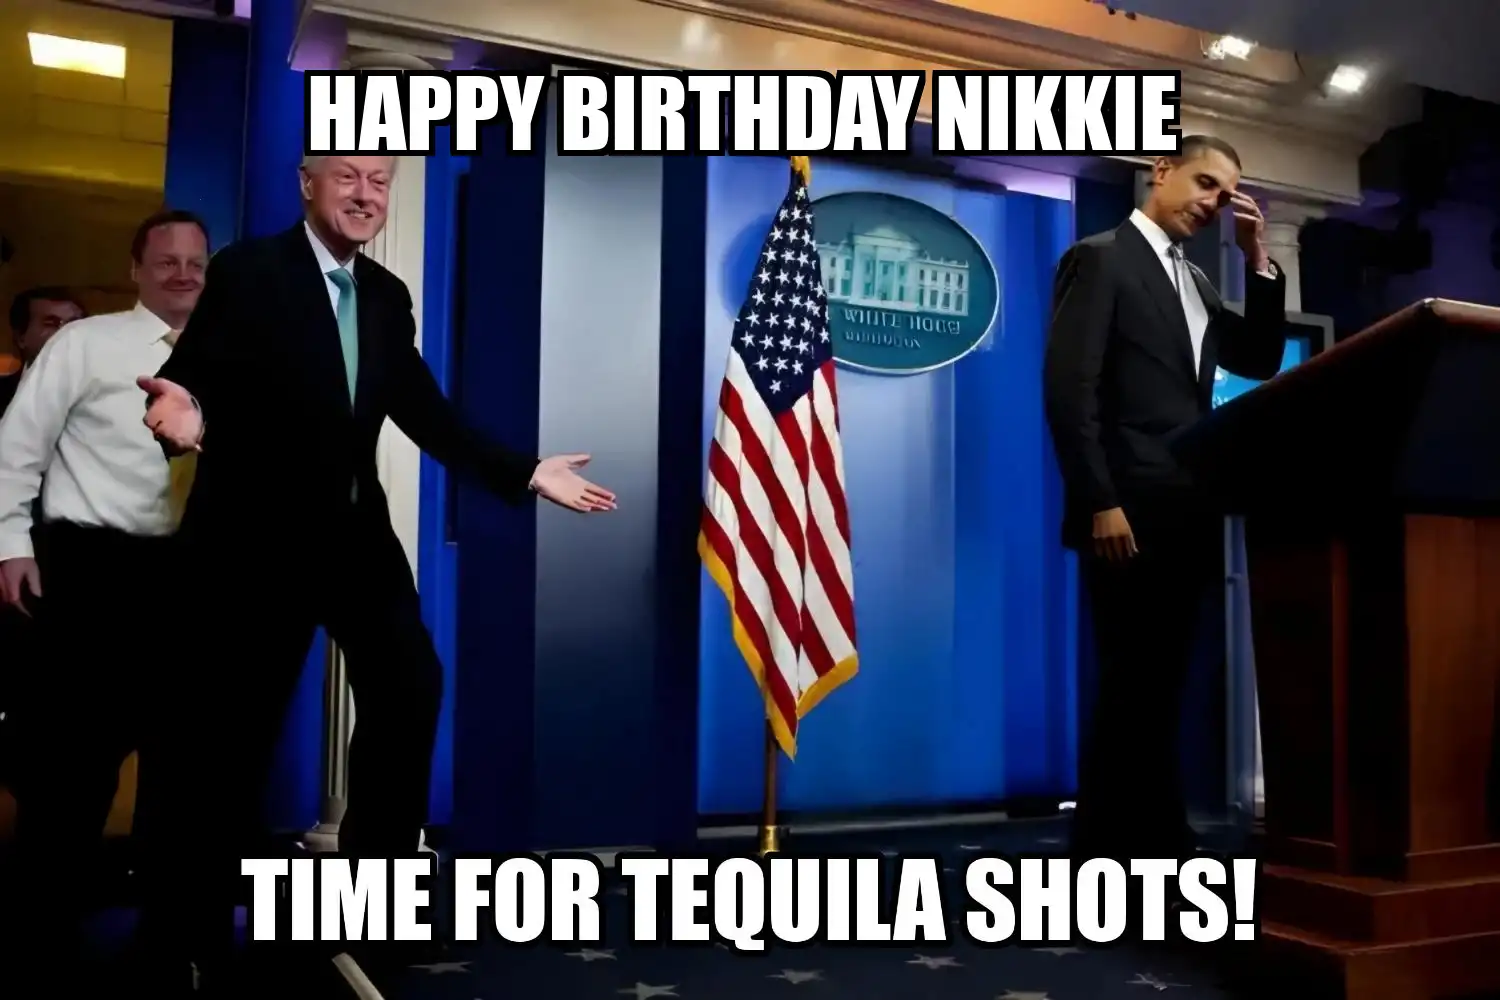 Happy Birthday Nikkie Time For Tequila Shots Memes